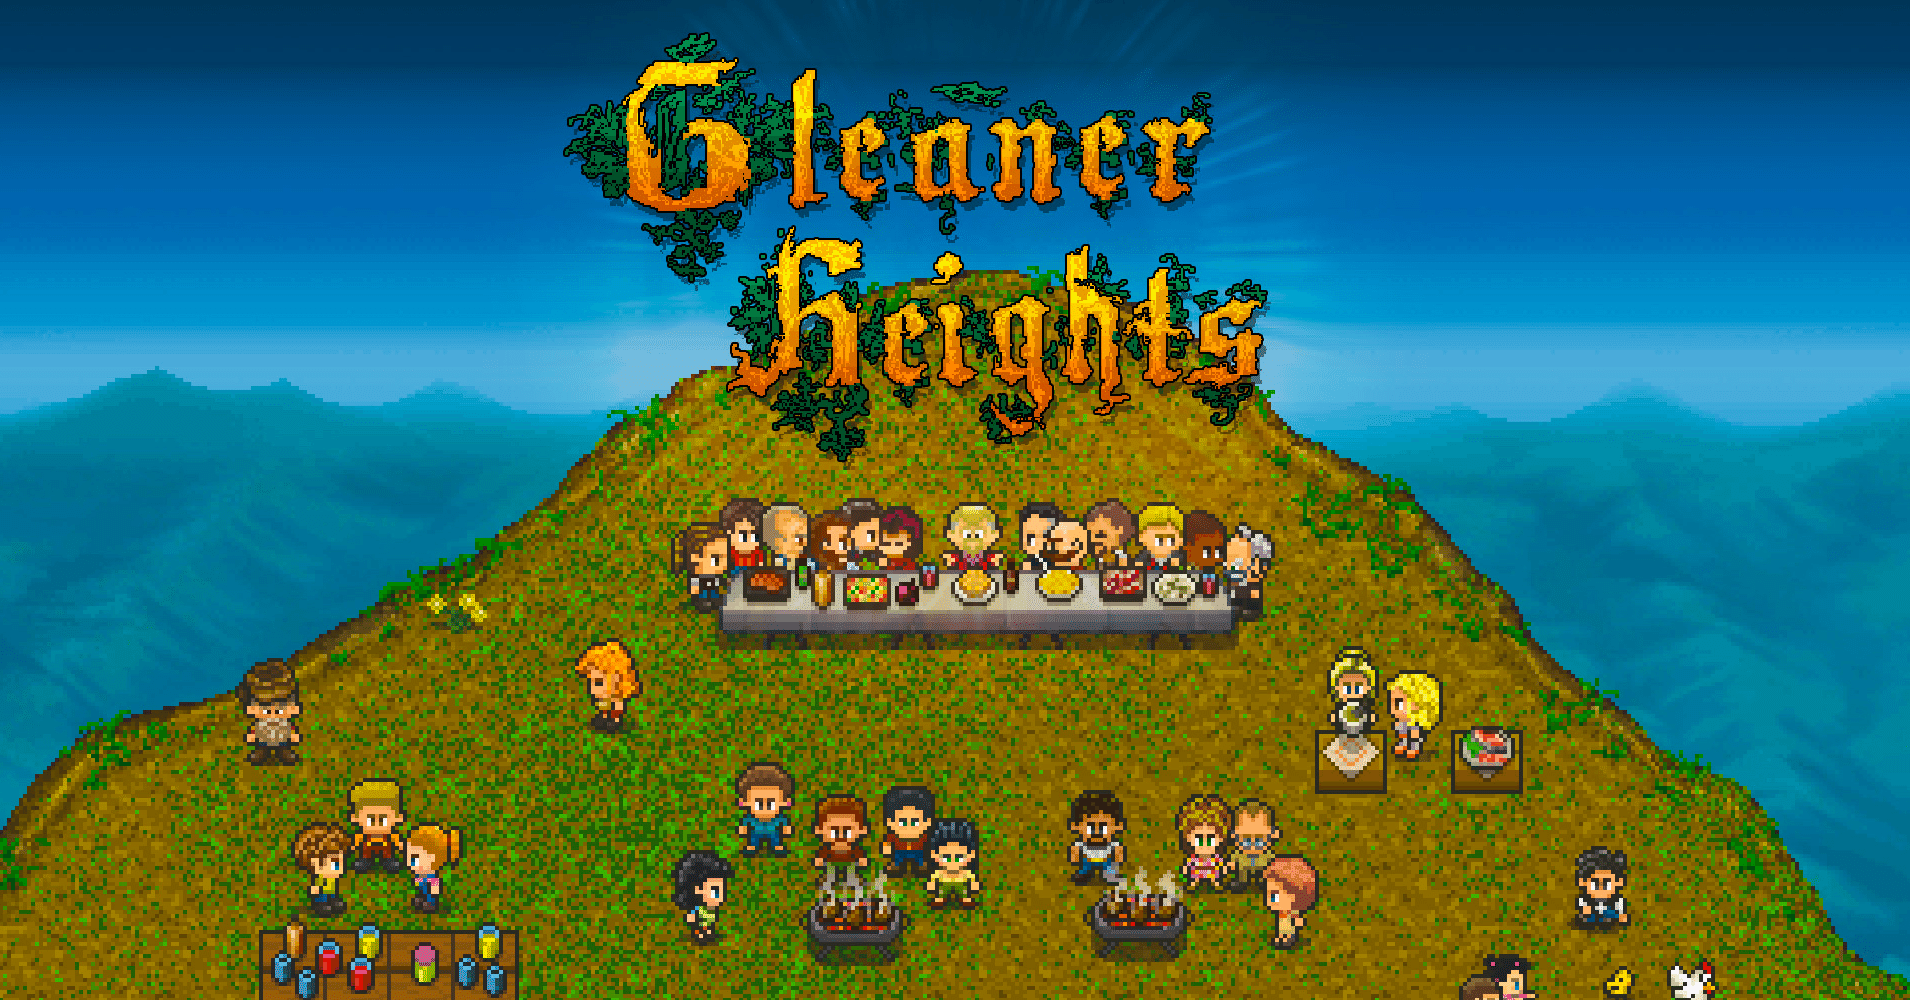 Gleaner Heights Game News Indie Game Fans News